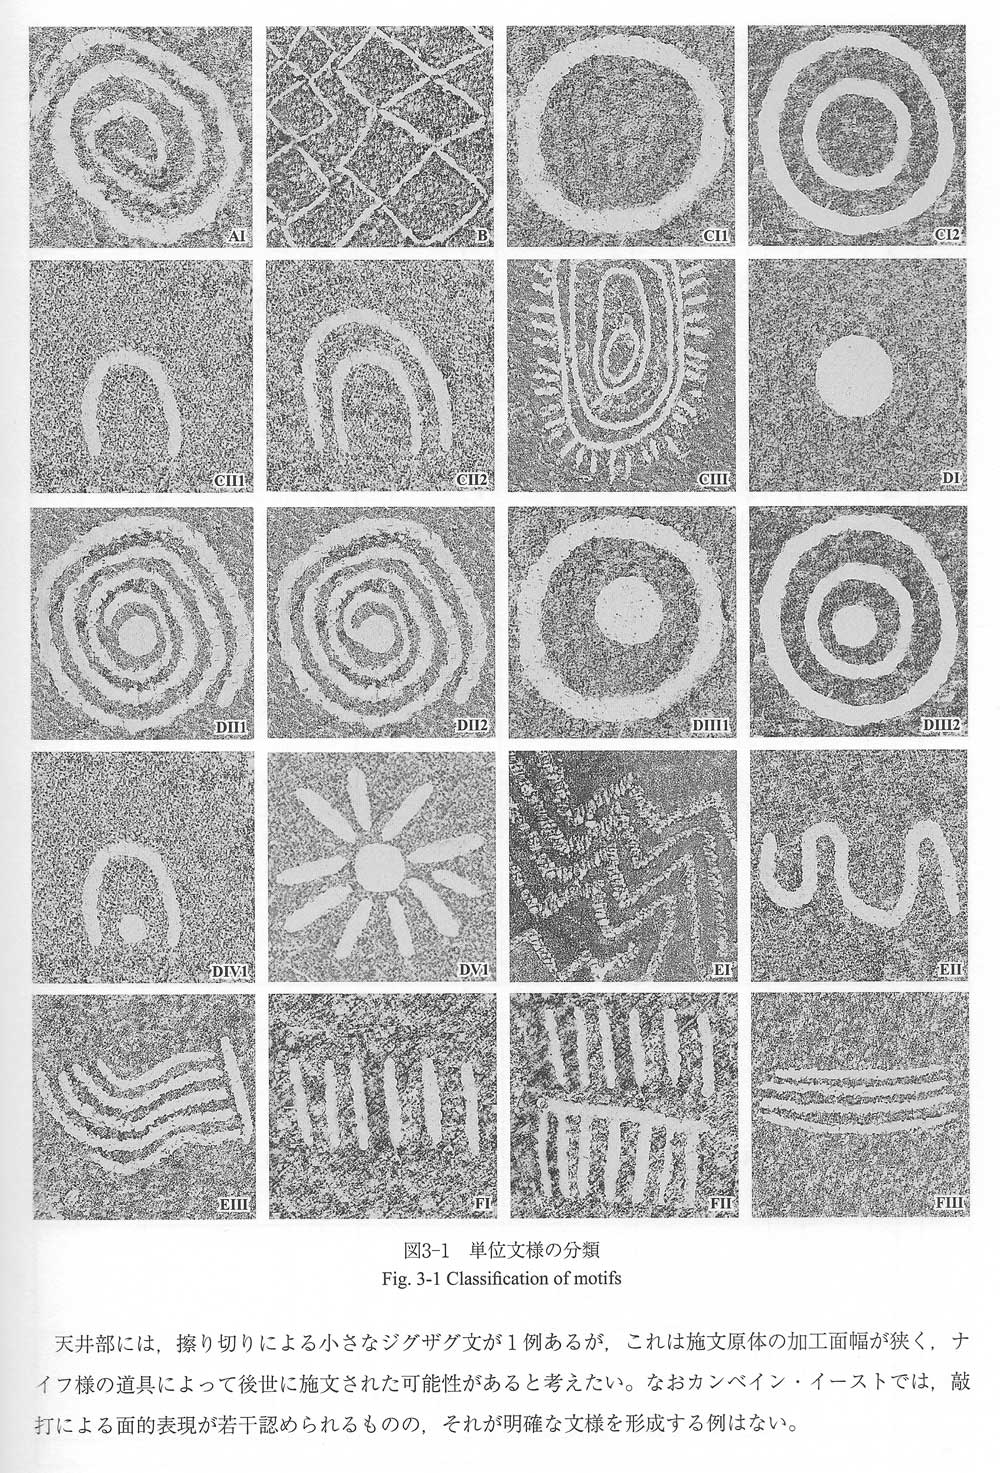 A table of the chief symbols encountered in the engraved art at Loughcrew, taken from the report produced by a team of researchers from Japan who surveyed the Loughcrew monuments in 1978 and 1979.